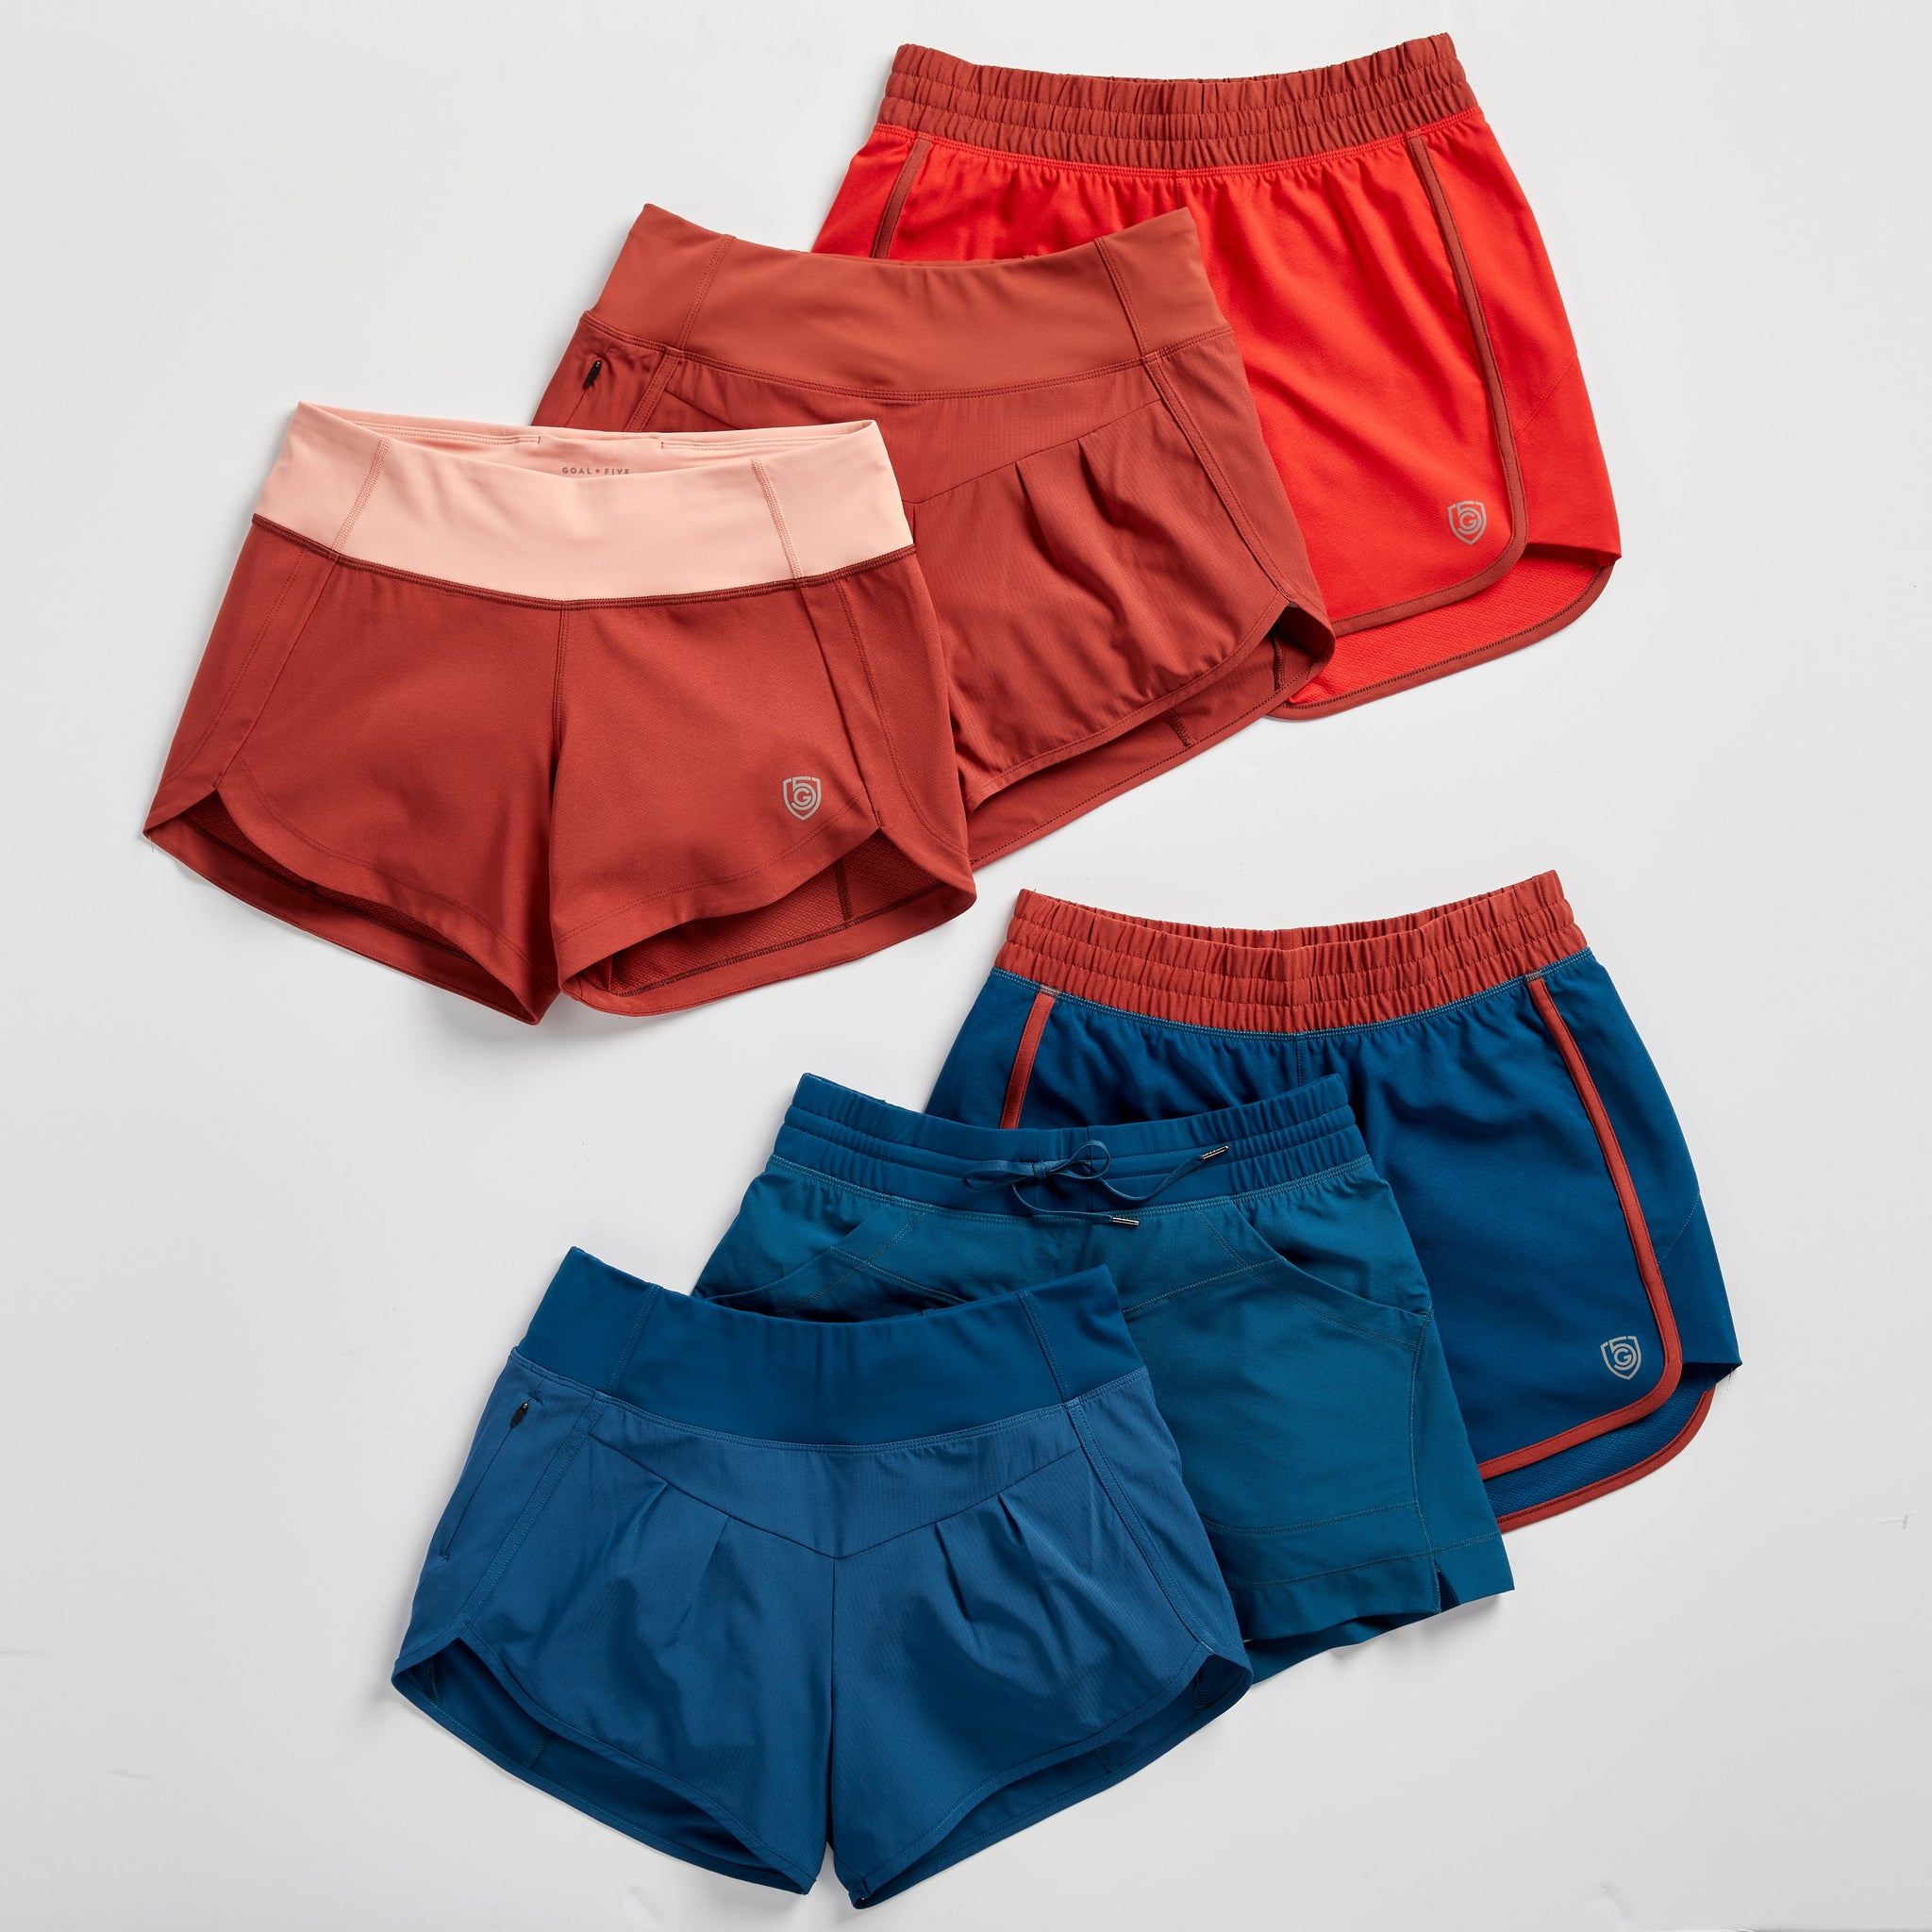 9 Gym Shorts Materials for Specific Workouts - Goal Five